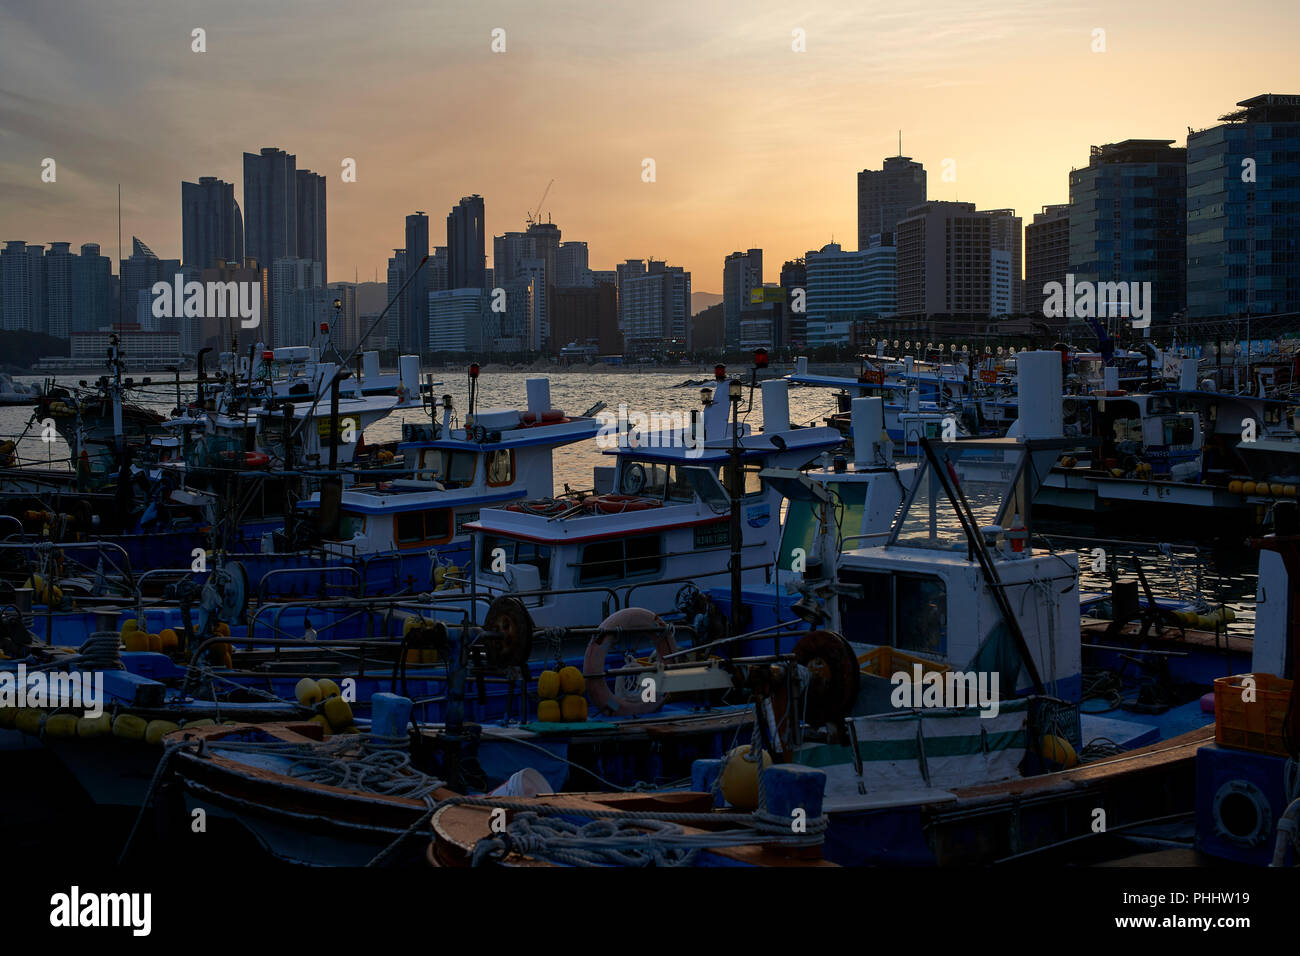 Moored fishing boats in the small harbour in Haeundae Bay, Busan Korea. Evening, sunset. Stock Photo